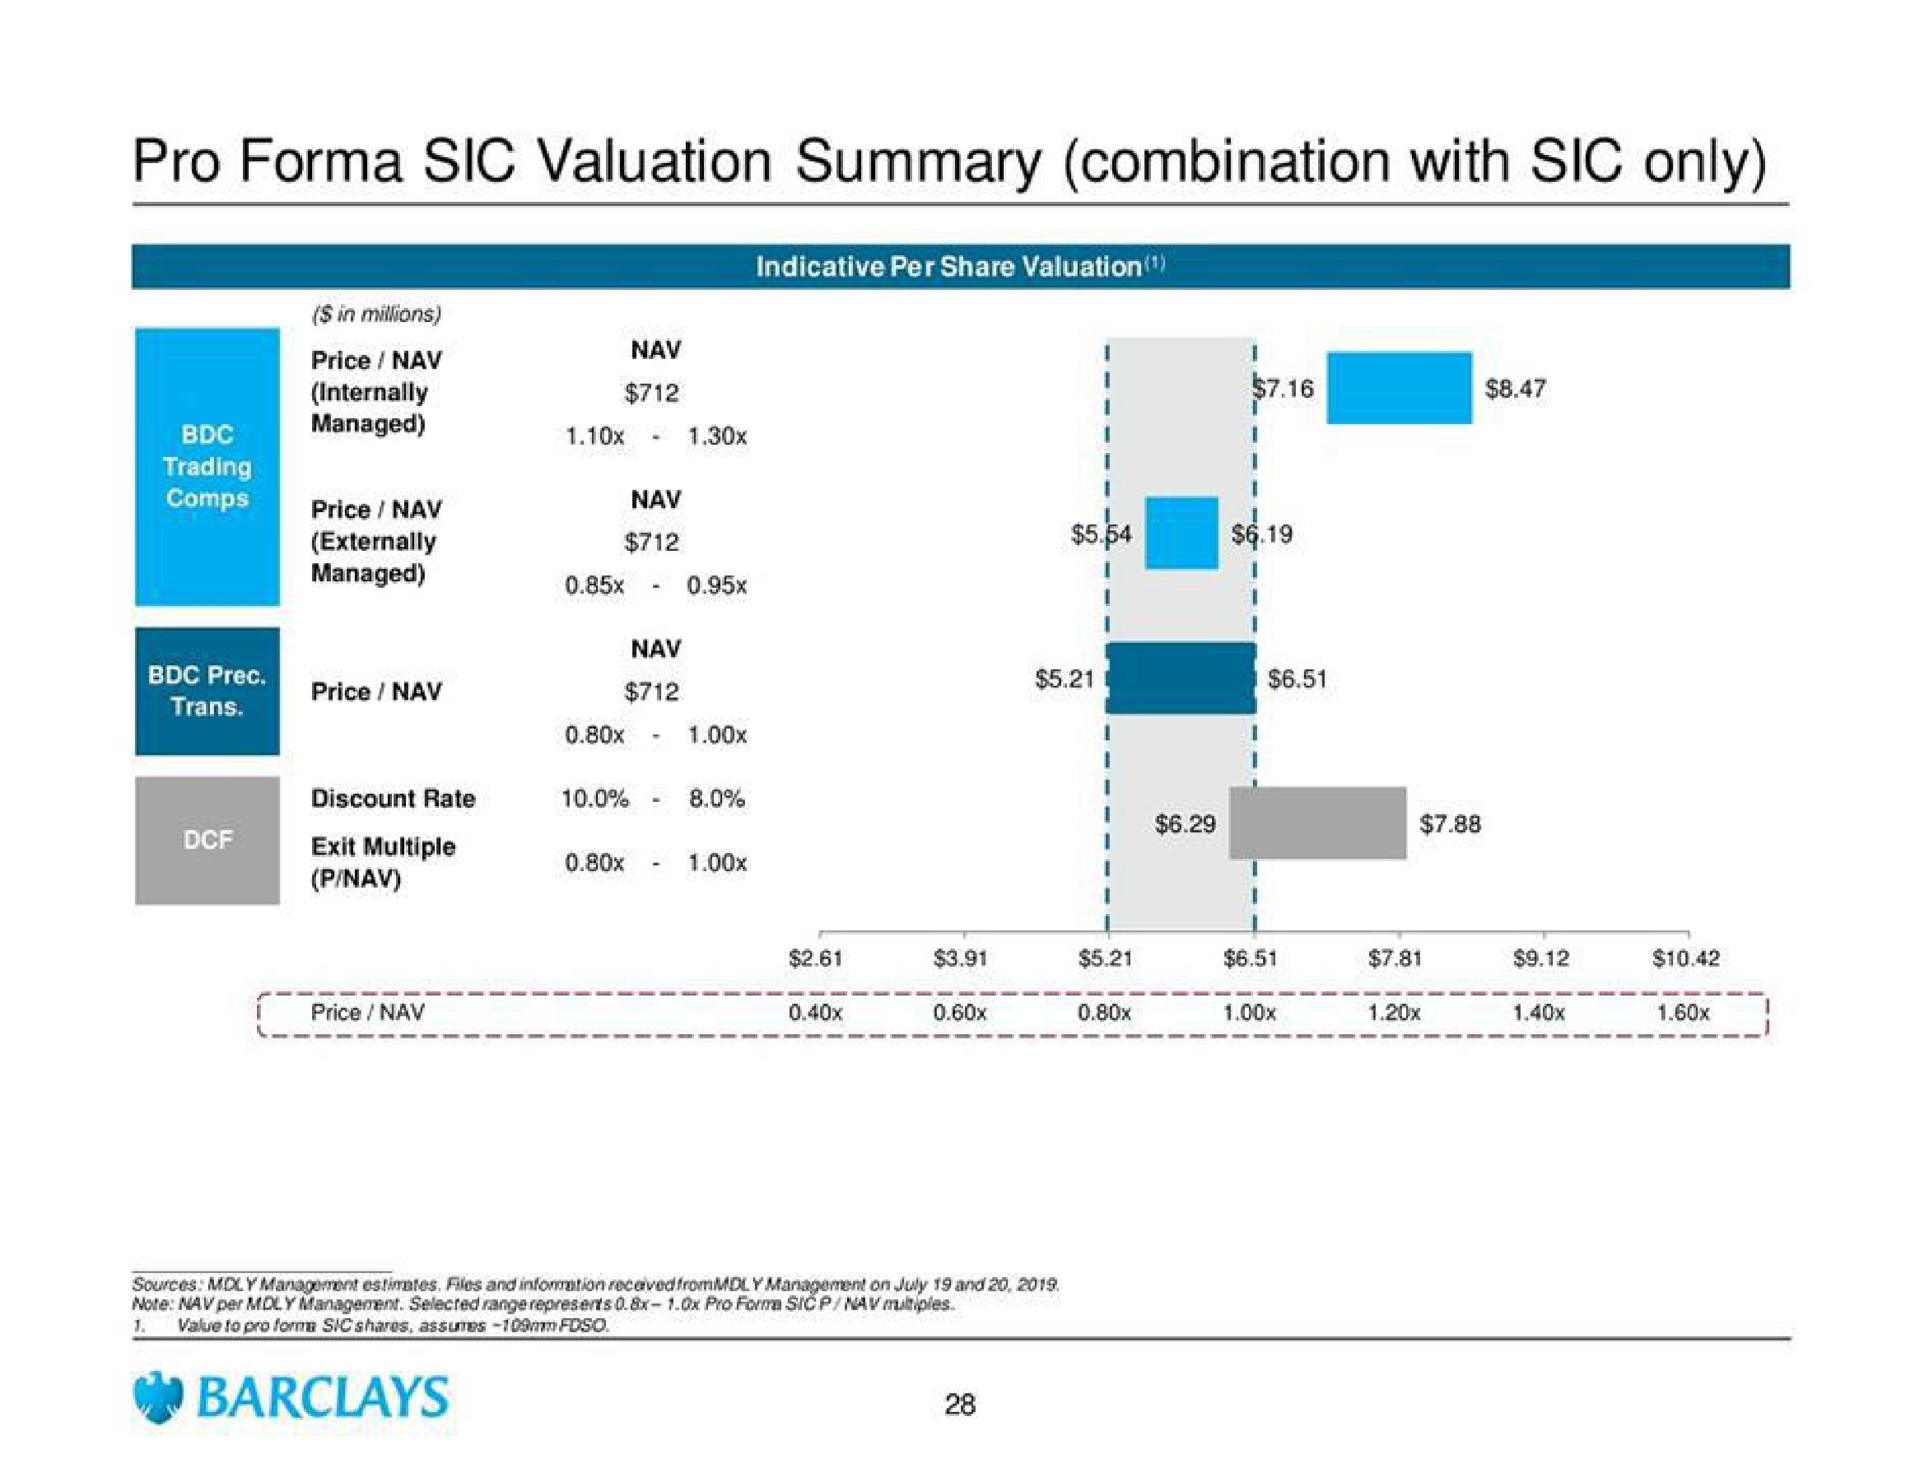 pro sic valuation summary combination with sic only | Barclays